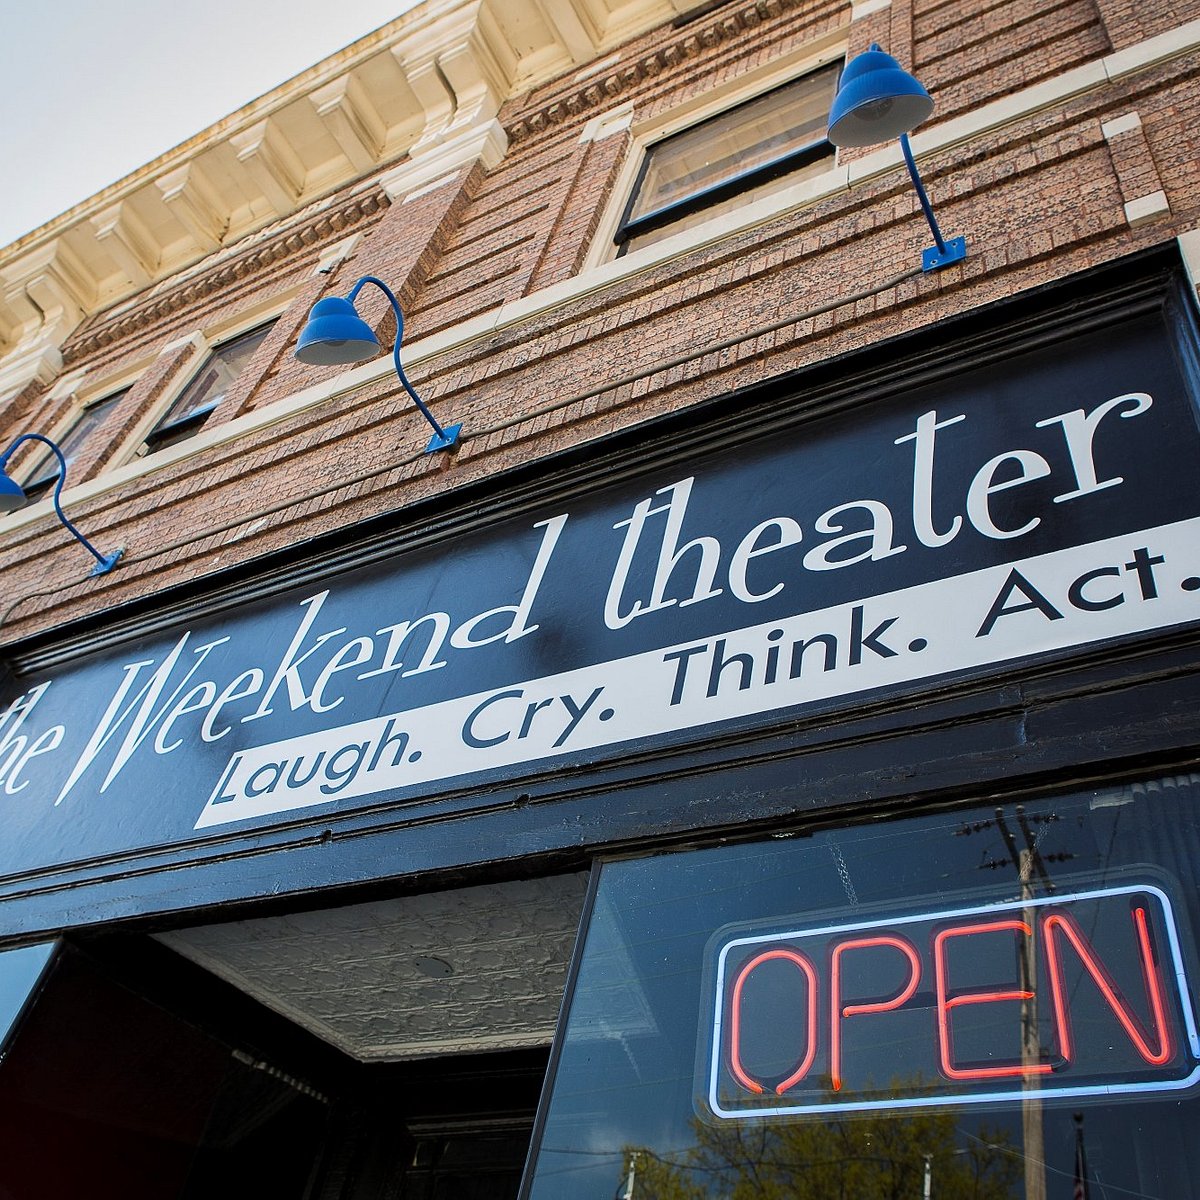 The Weekend Theater is now hiring an Artistic Director!